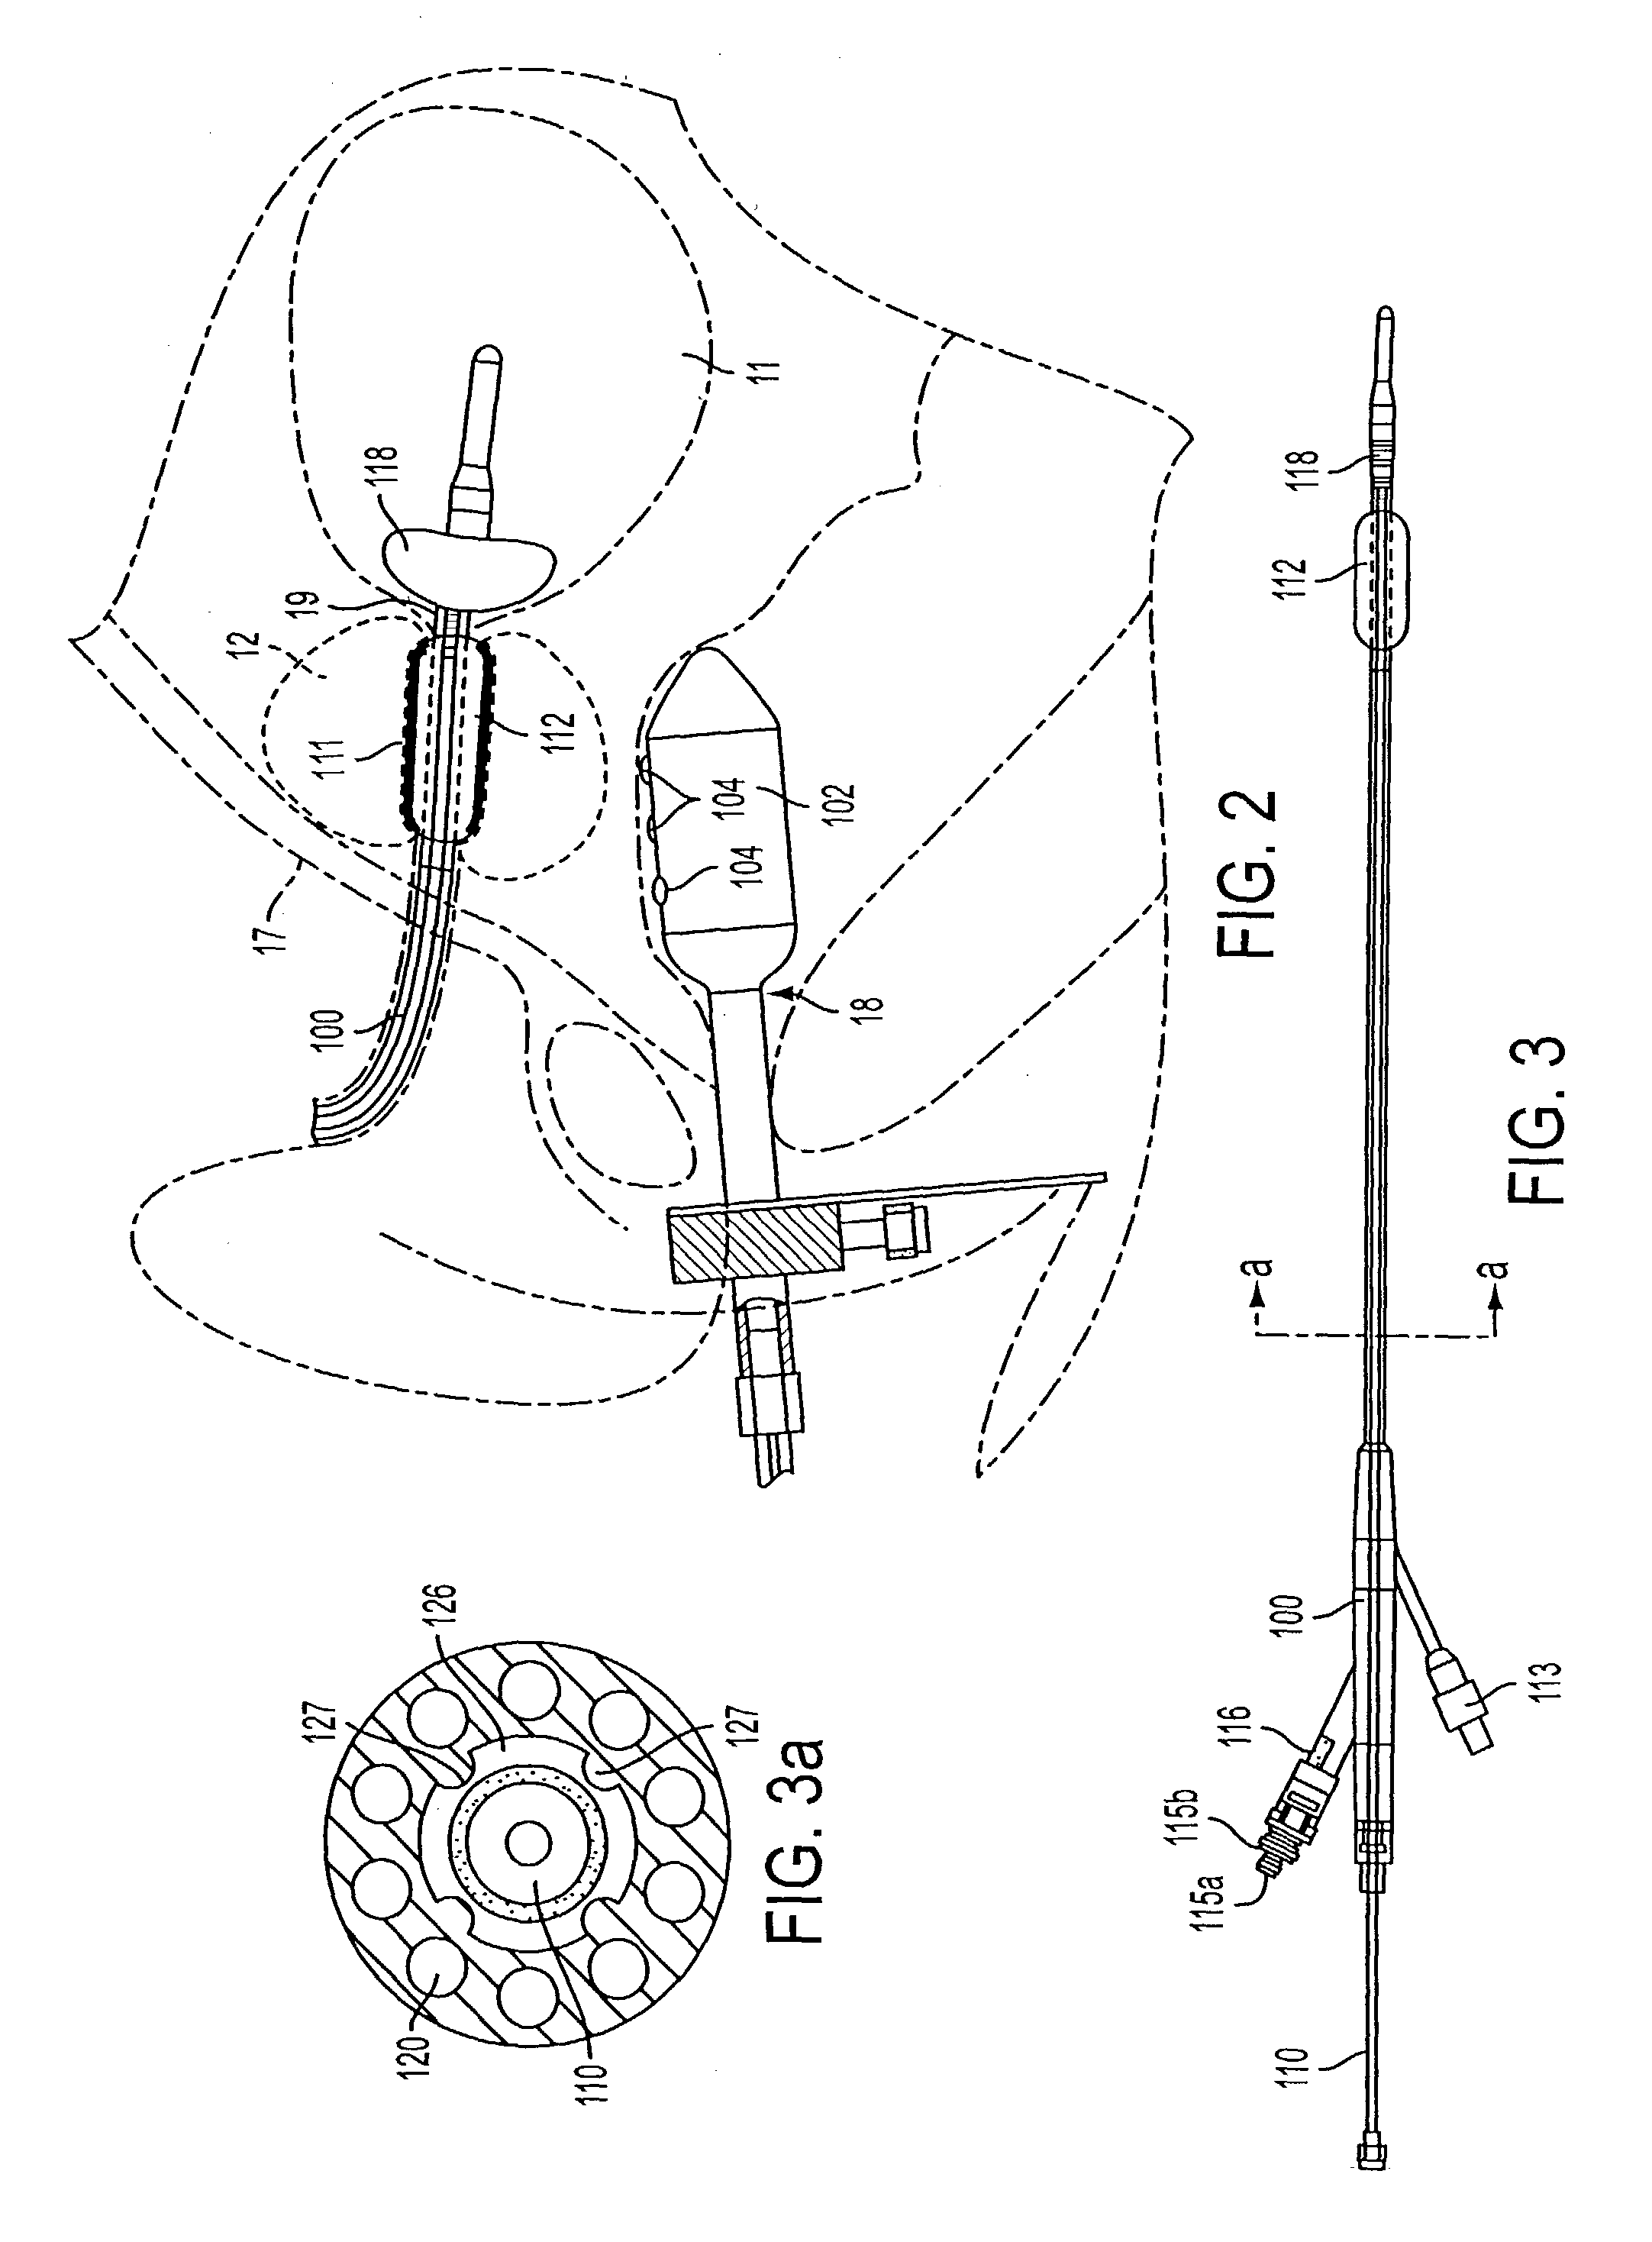 Apparatus for treatment of tissue adjacent a bodily conduit with a gene or drug-coated compression balloon